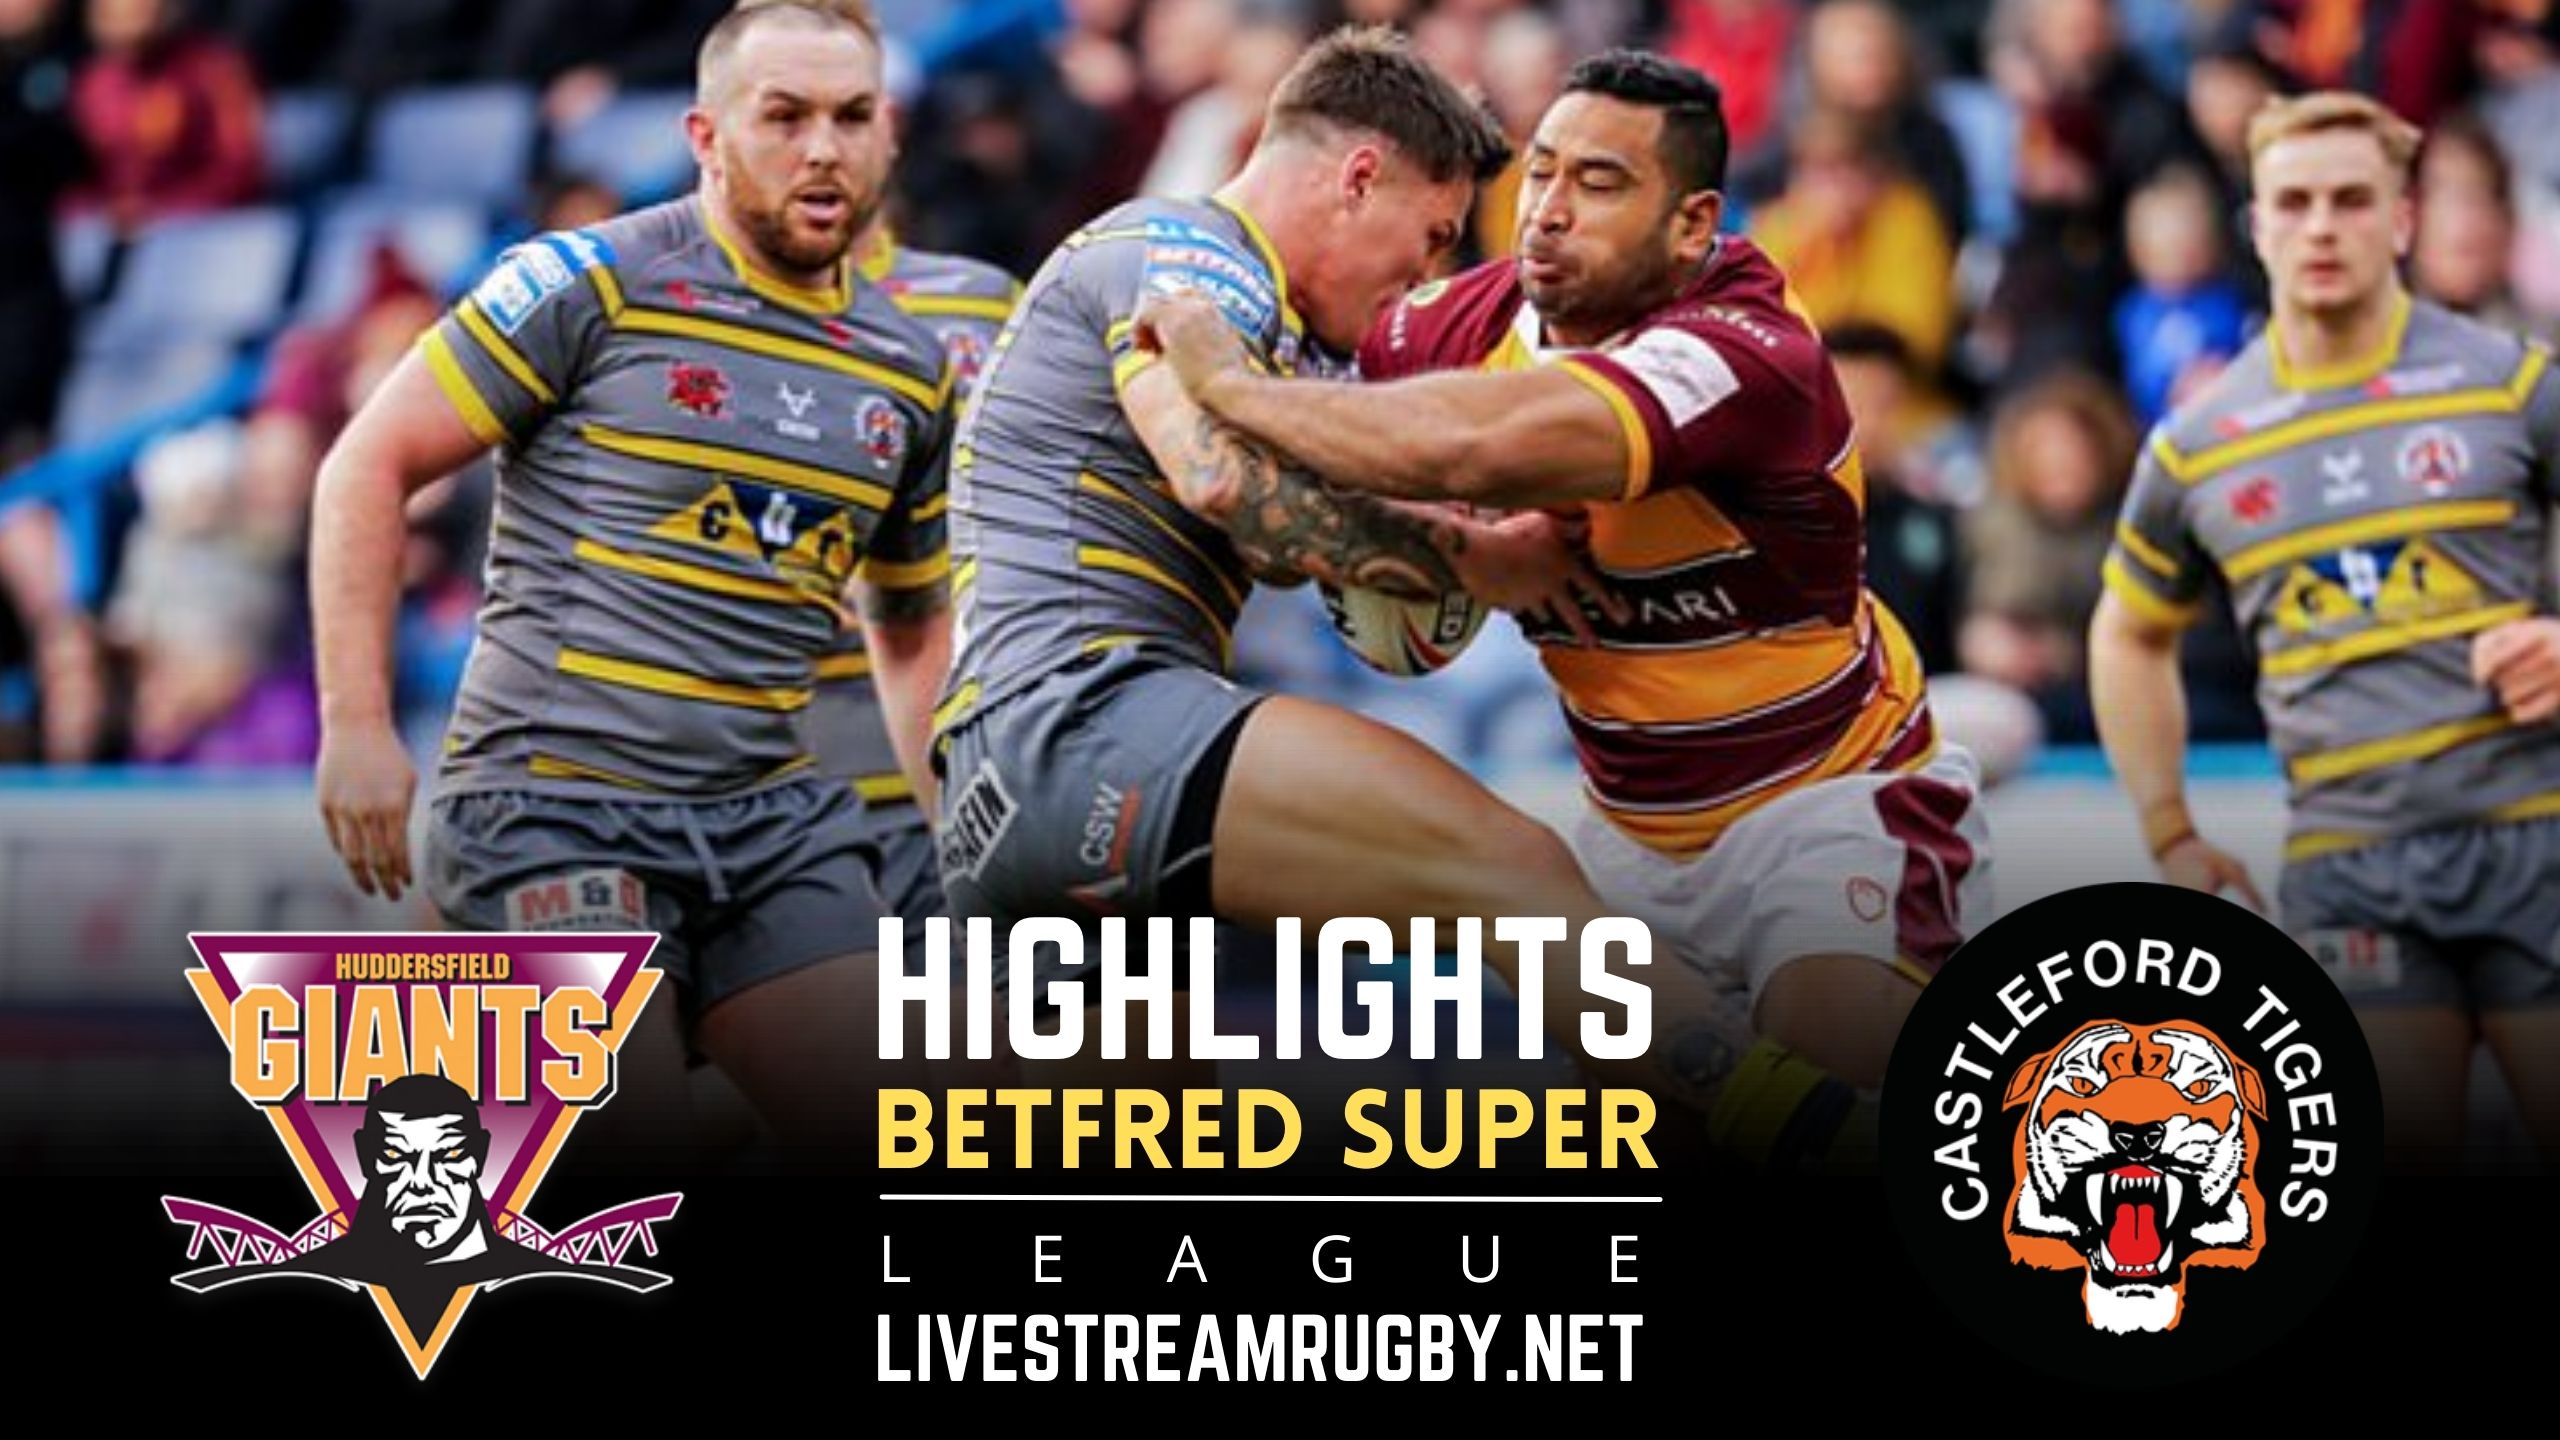 Giants Vs Castleford Tigers Rd 24 Highlights 2022 Super League